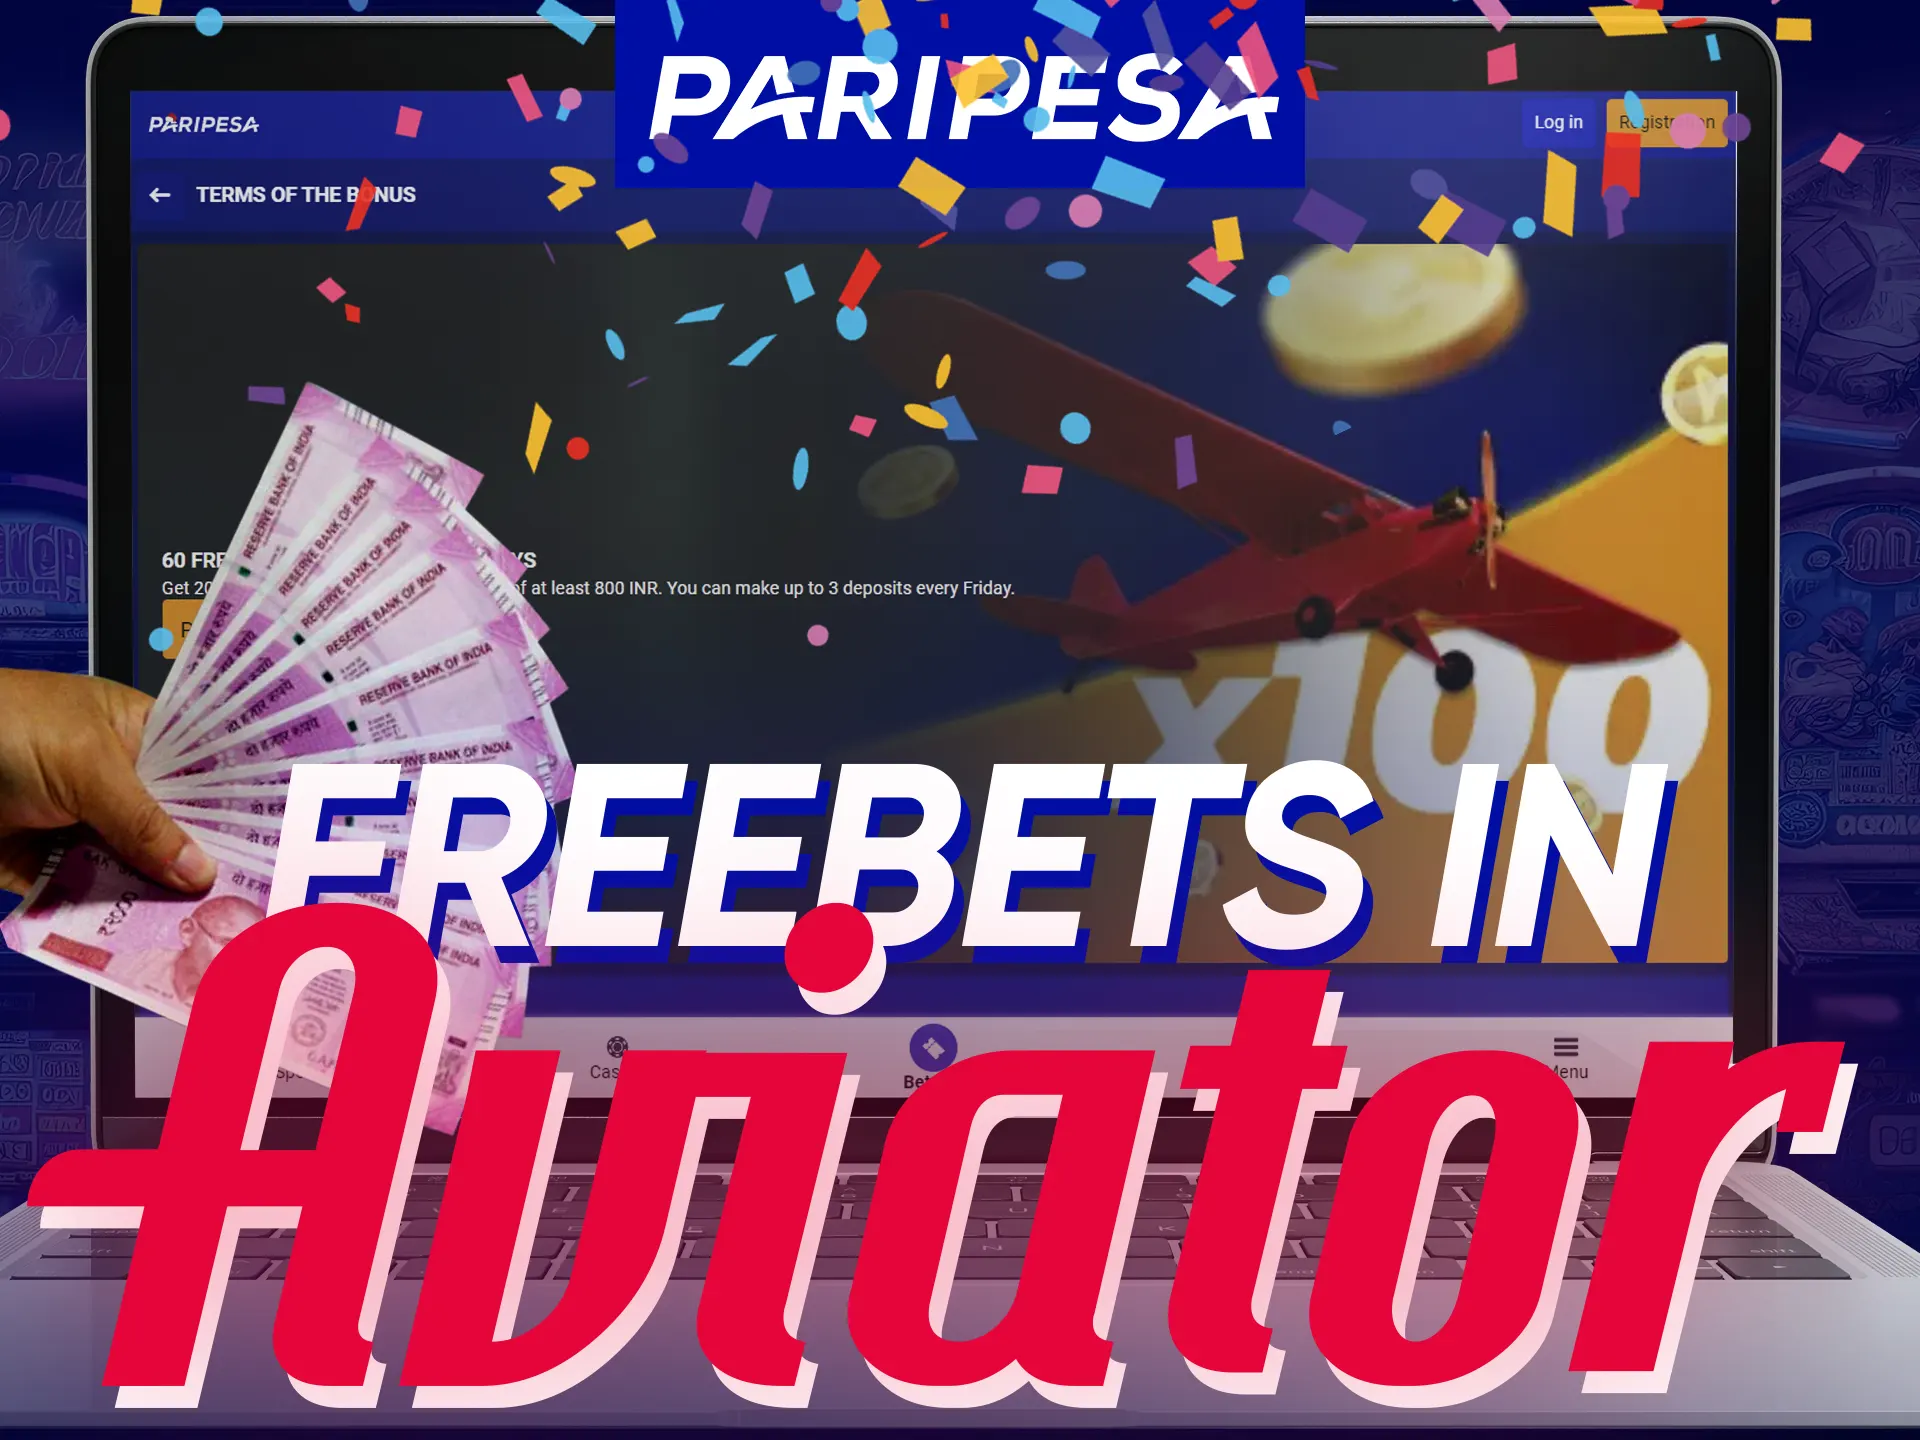 Get Aviator free bets at Paripesa: Deposit a minimum amount, make several deposits, and receive a set number of spins.